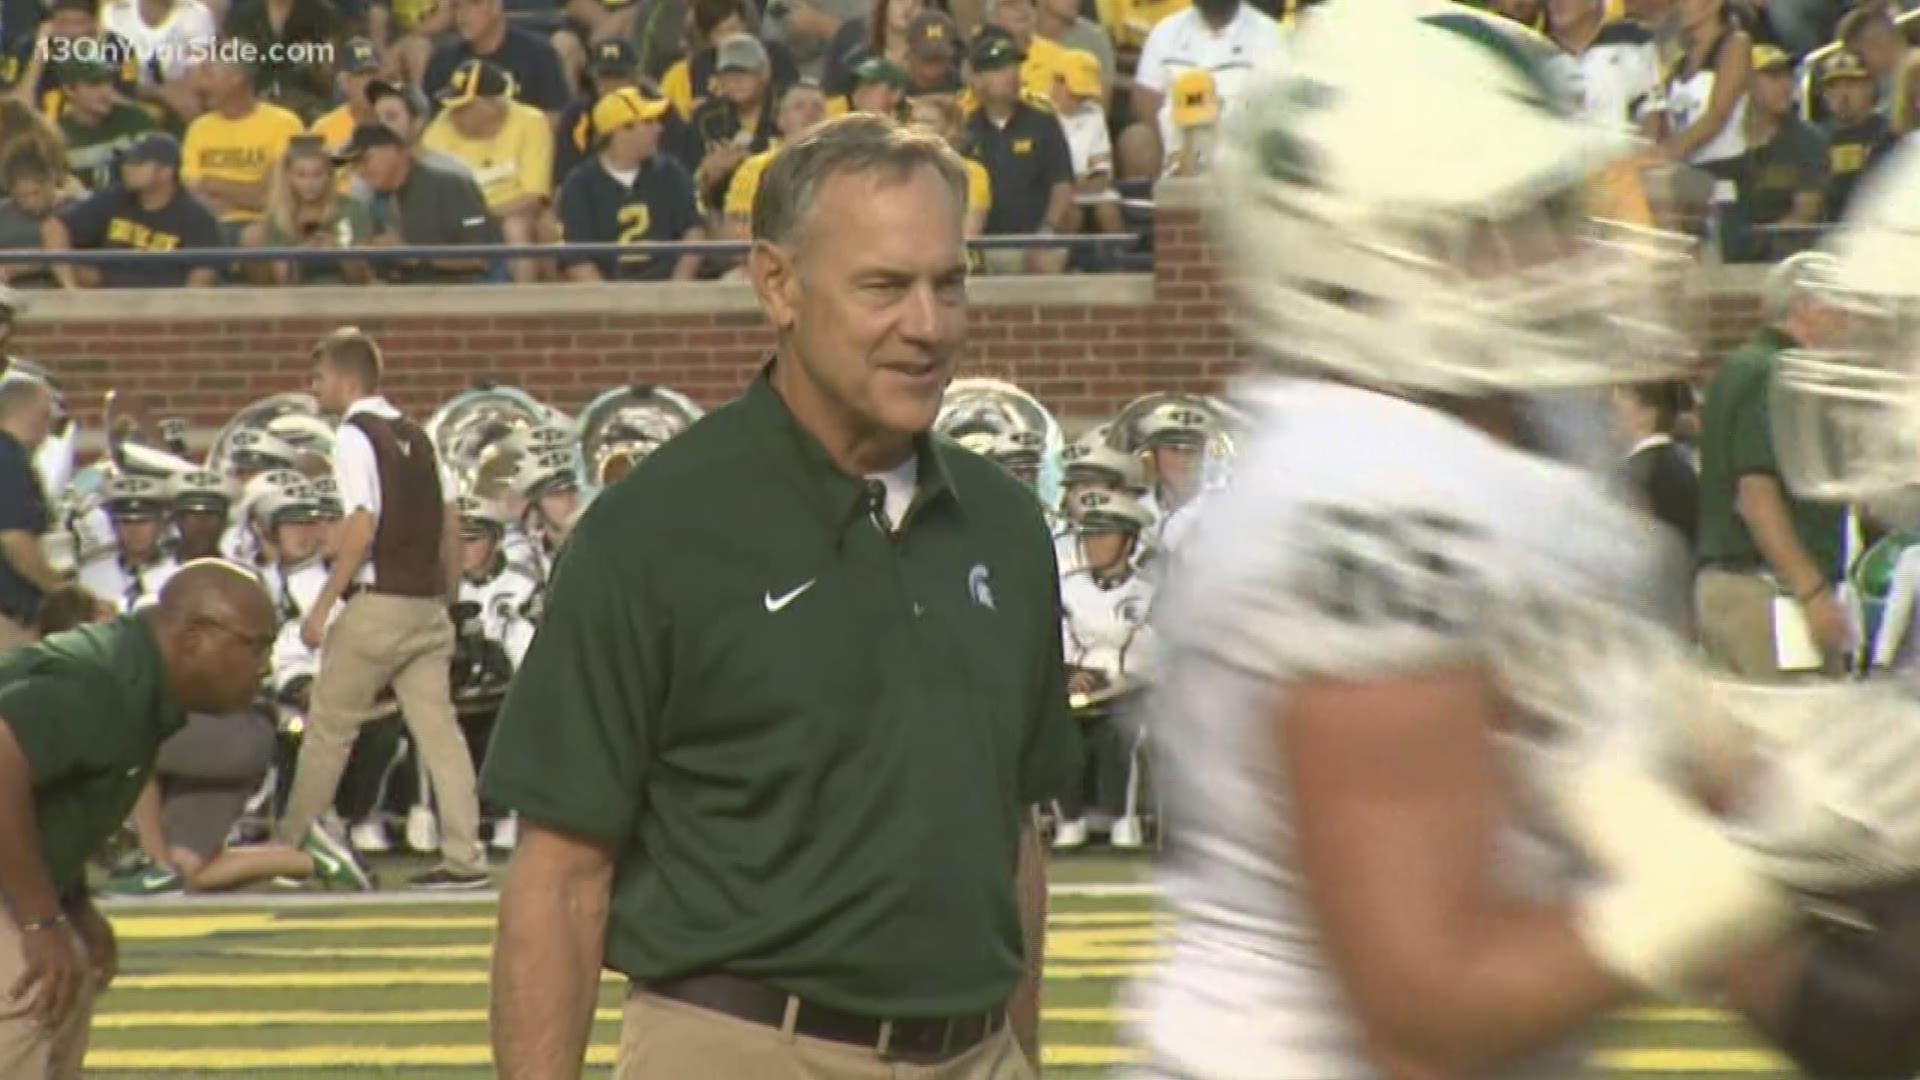 With the Spartans in a five-game losing streak, head coach Mark Dantonio quelled rumors about his future as head coach.